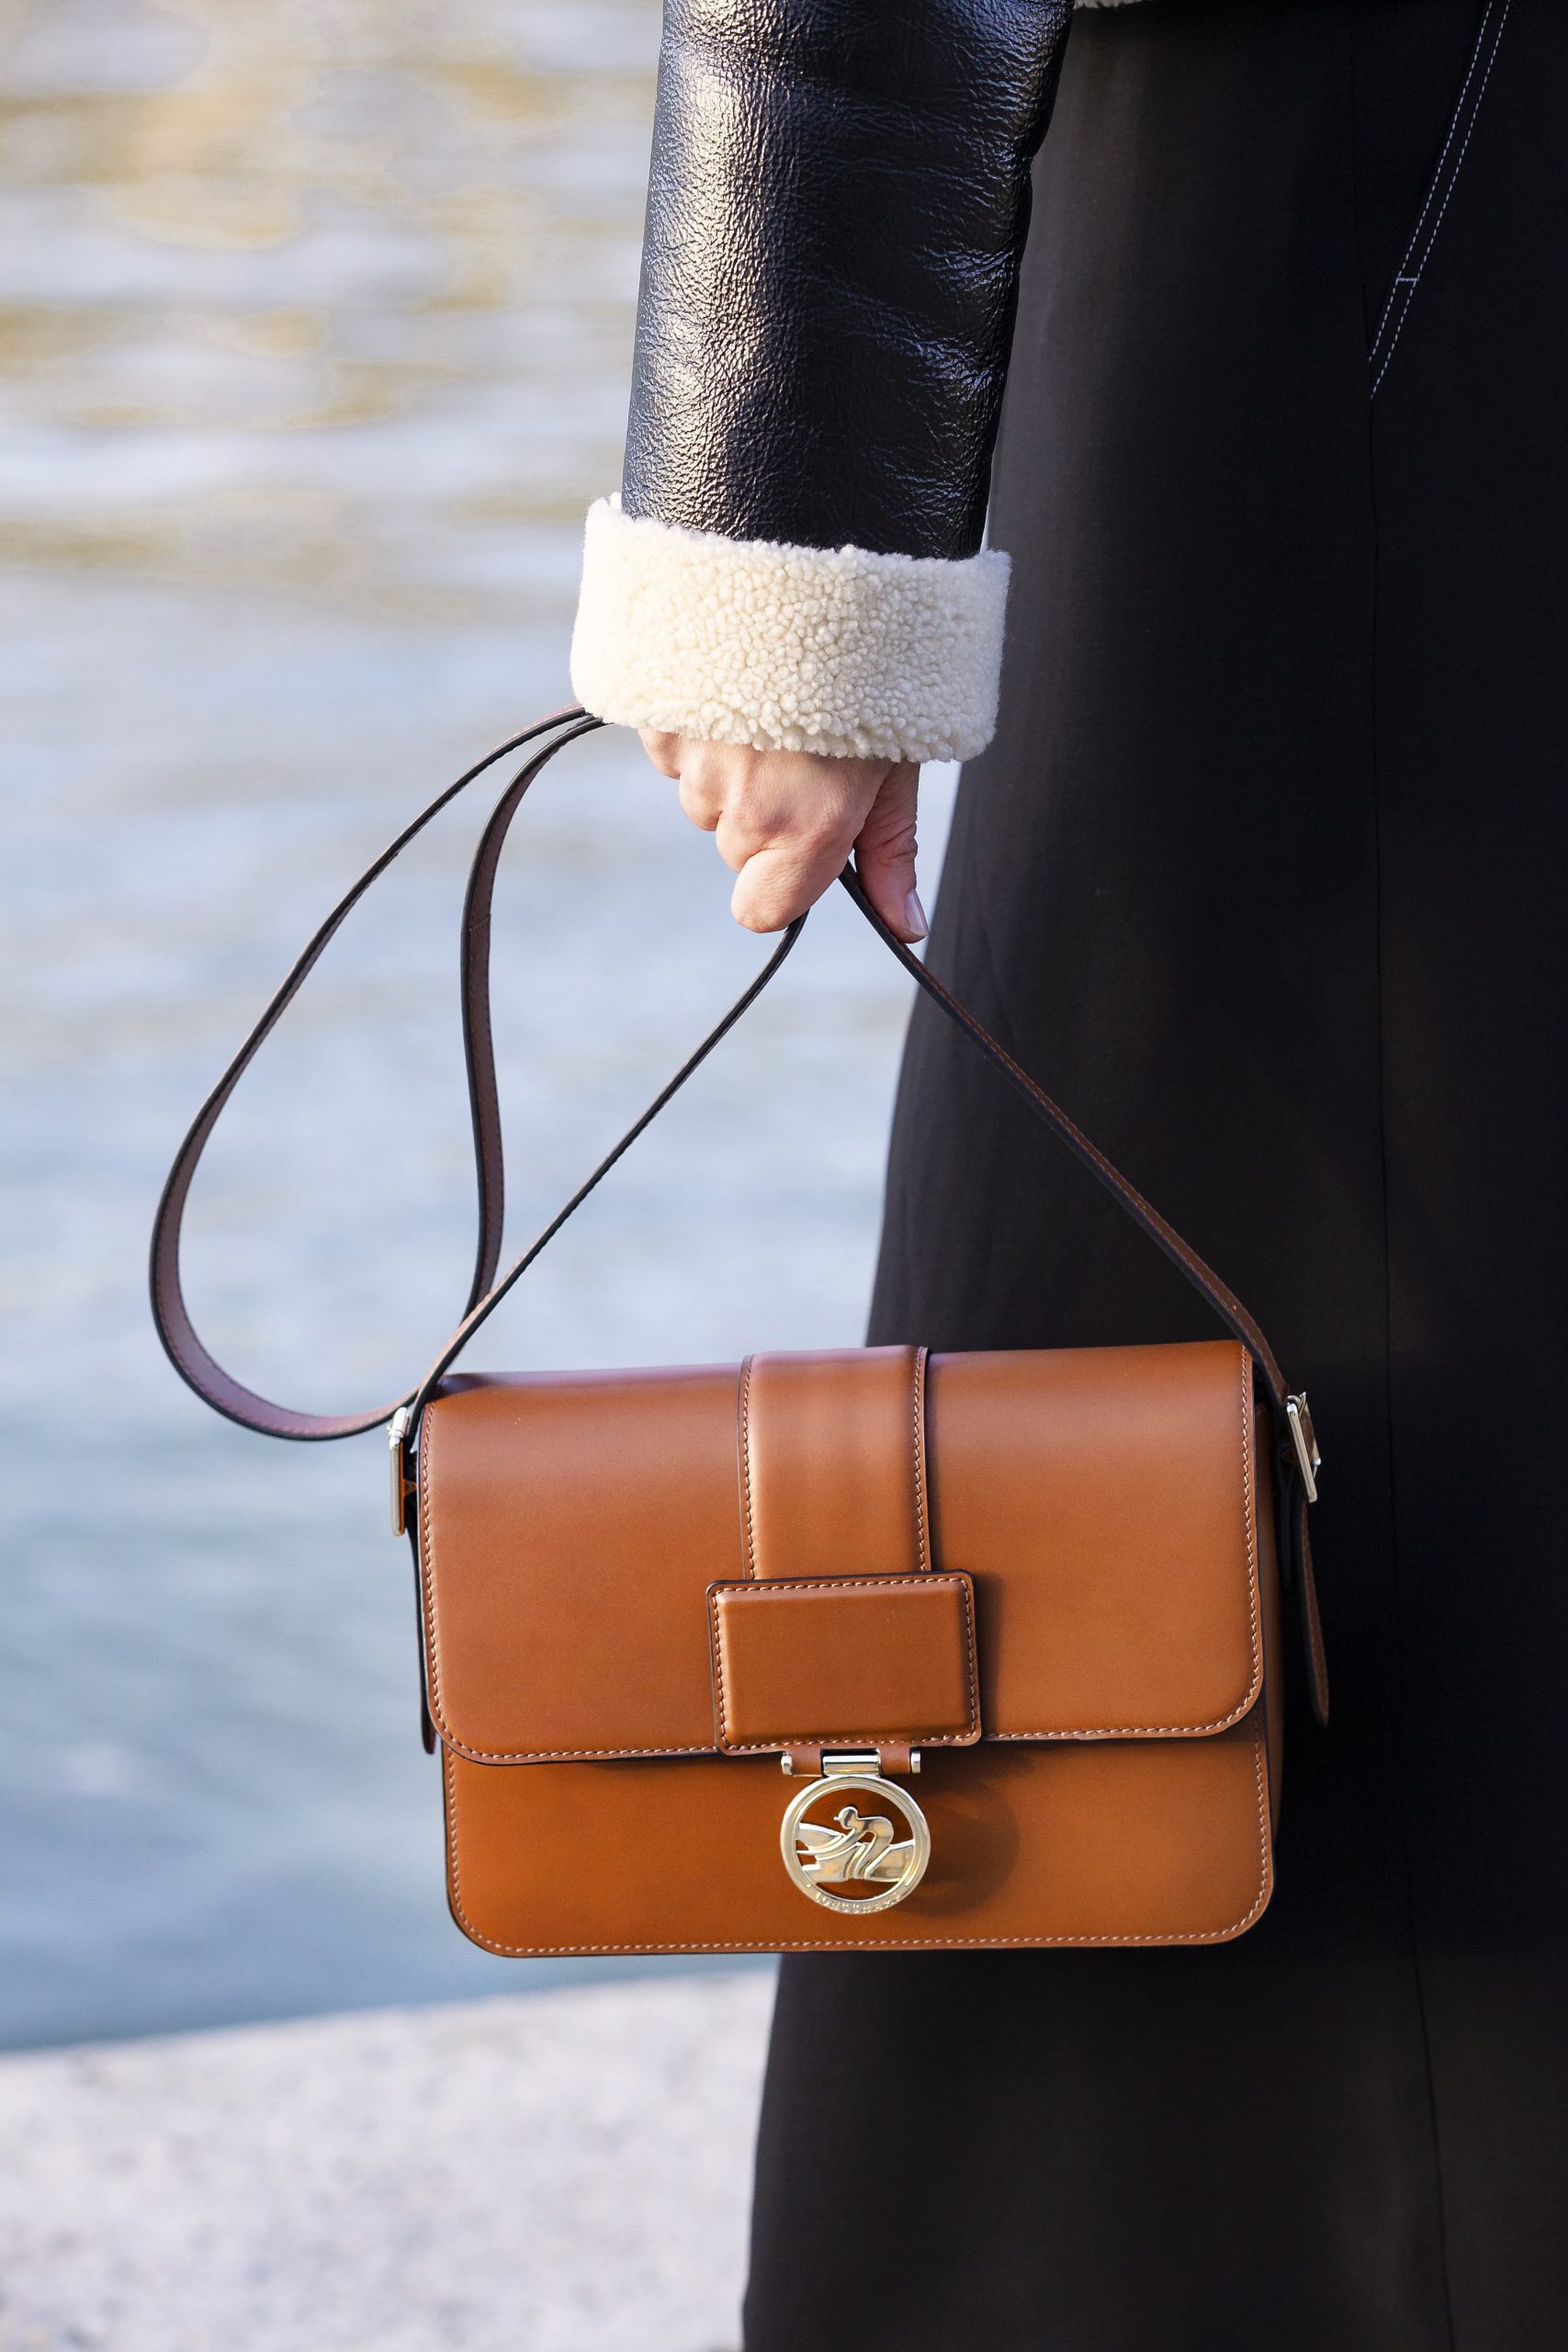 THE ITS BAG LONGCHAMP POUCH, Article posted by Fatinazyanzi